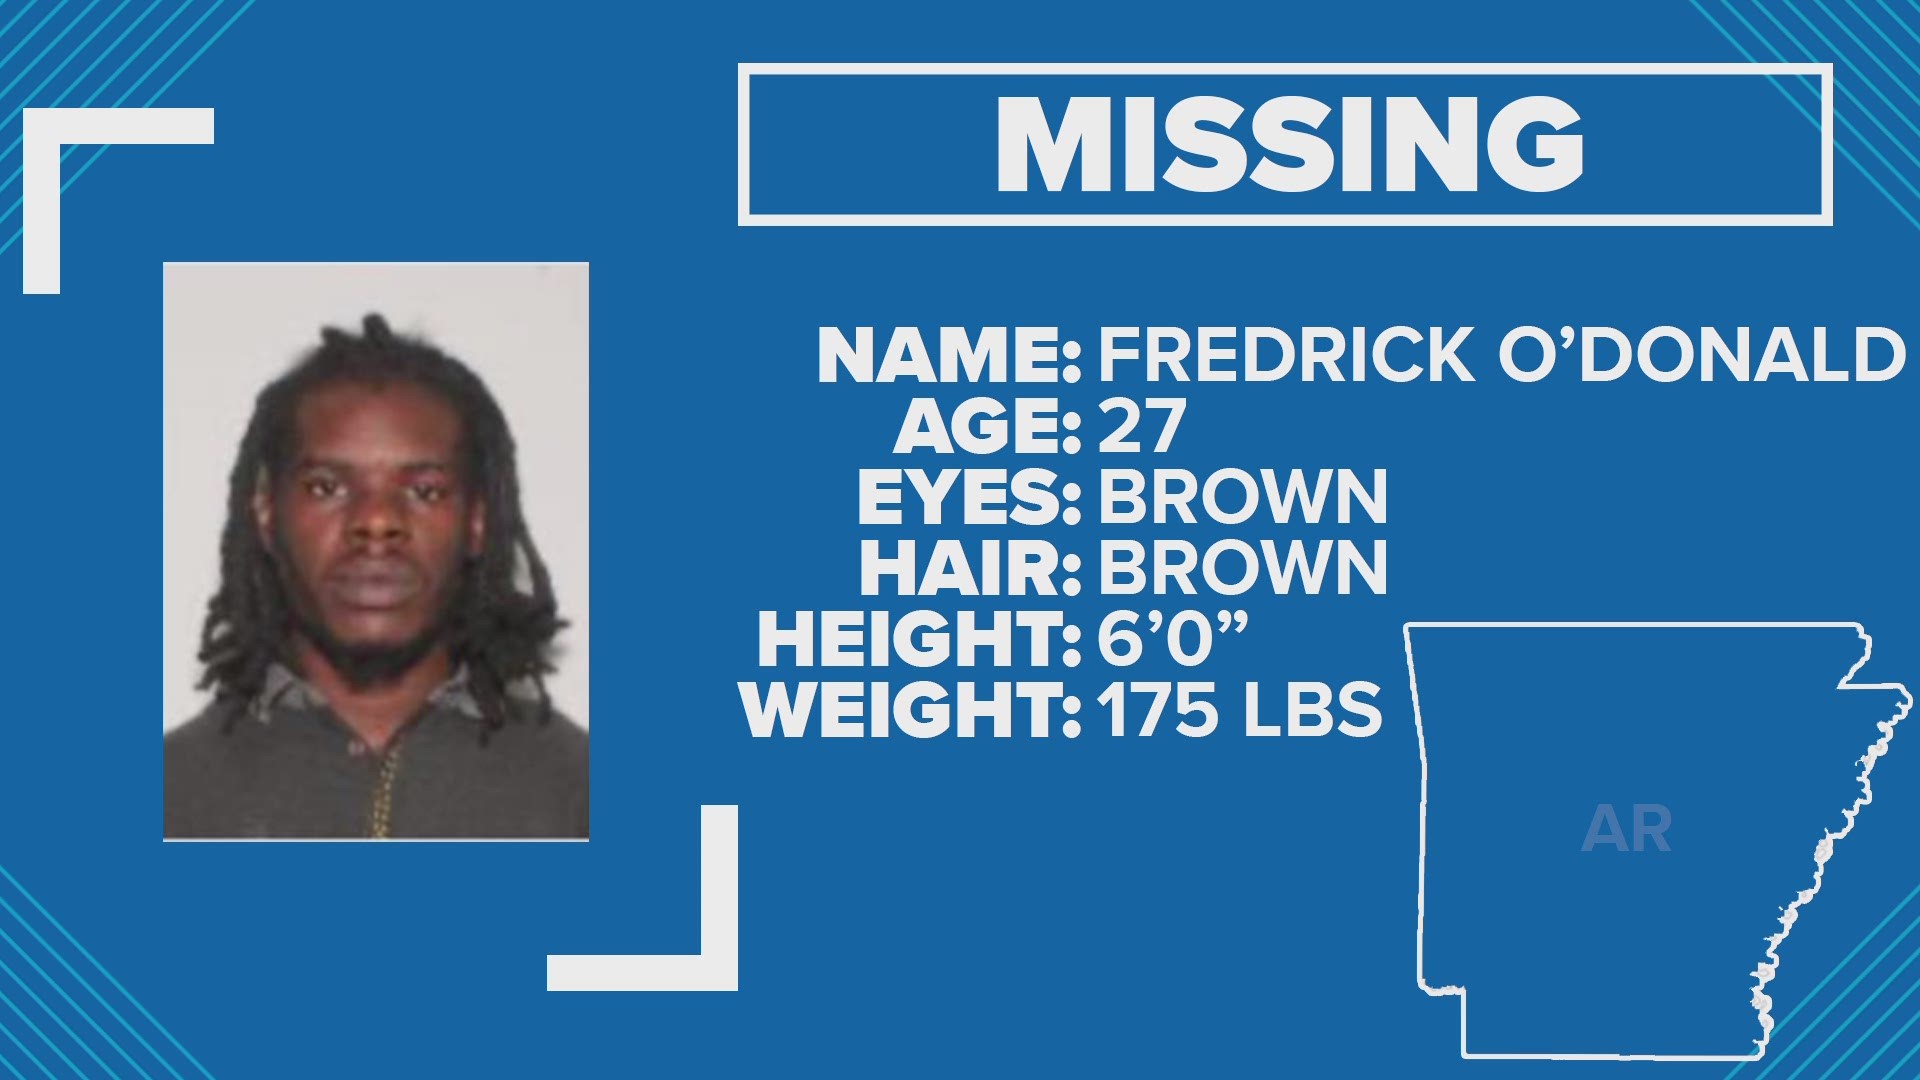 Little Rock police searching for missing 27-year-old man